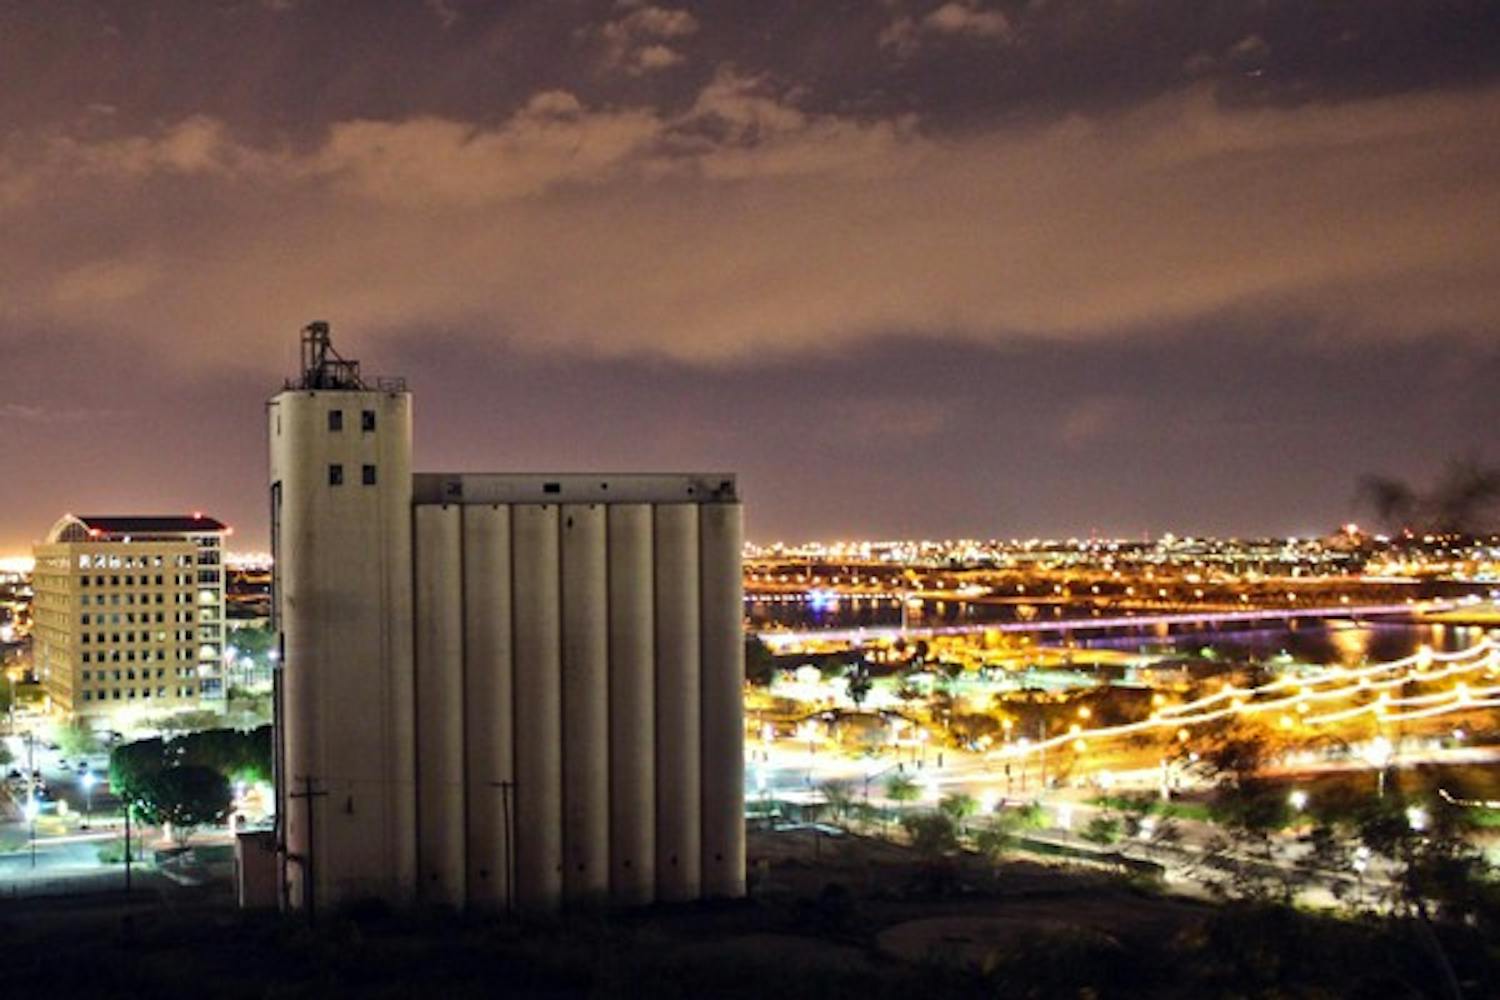 Dusk falls around Tempe’s Hayden Flour Mill on Feb. 16. The mill is currently undergoing renovations to become a public venue. (Photo by Marissa Krings)